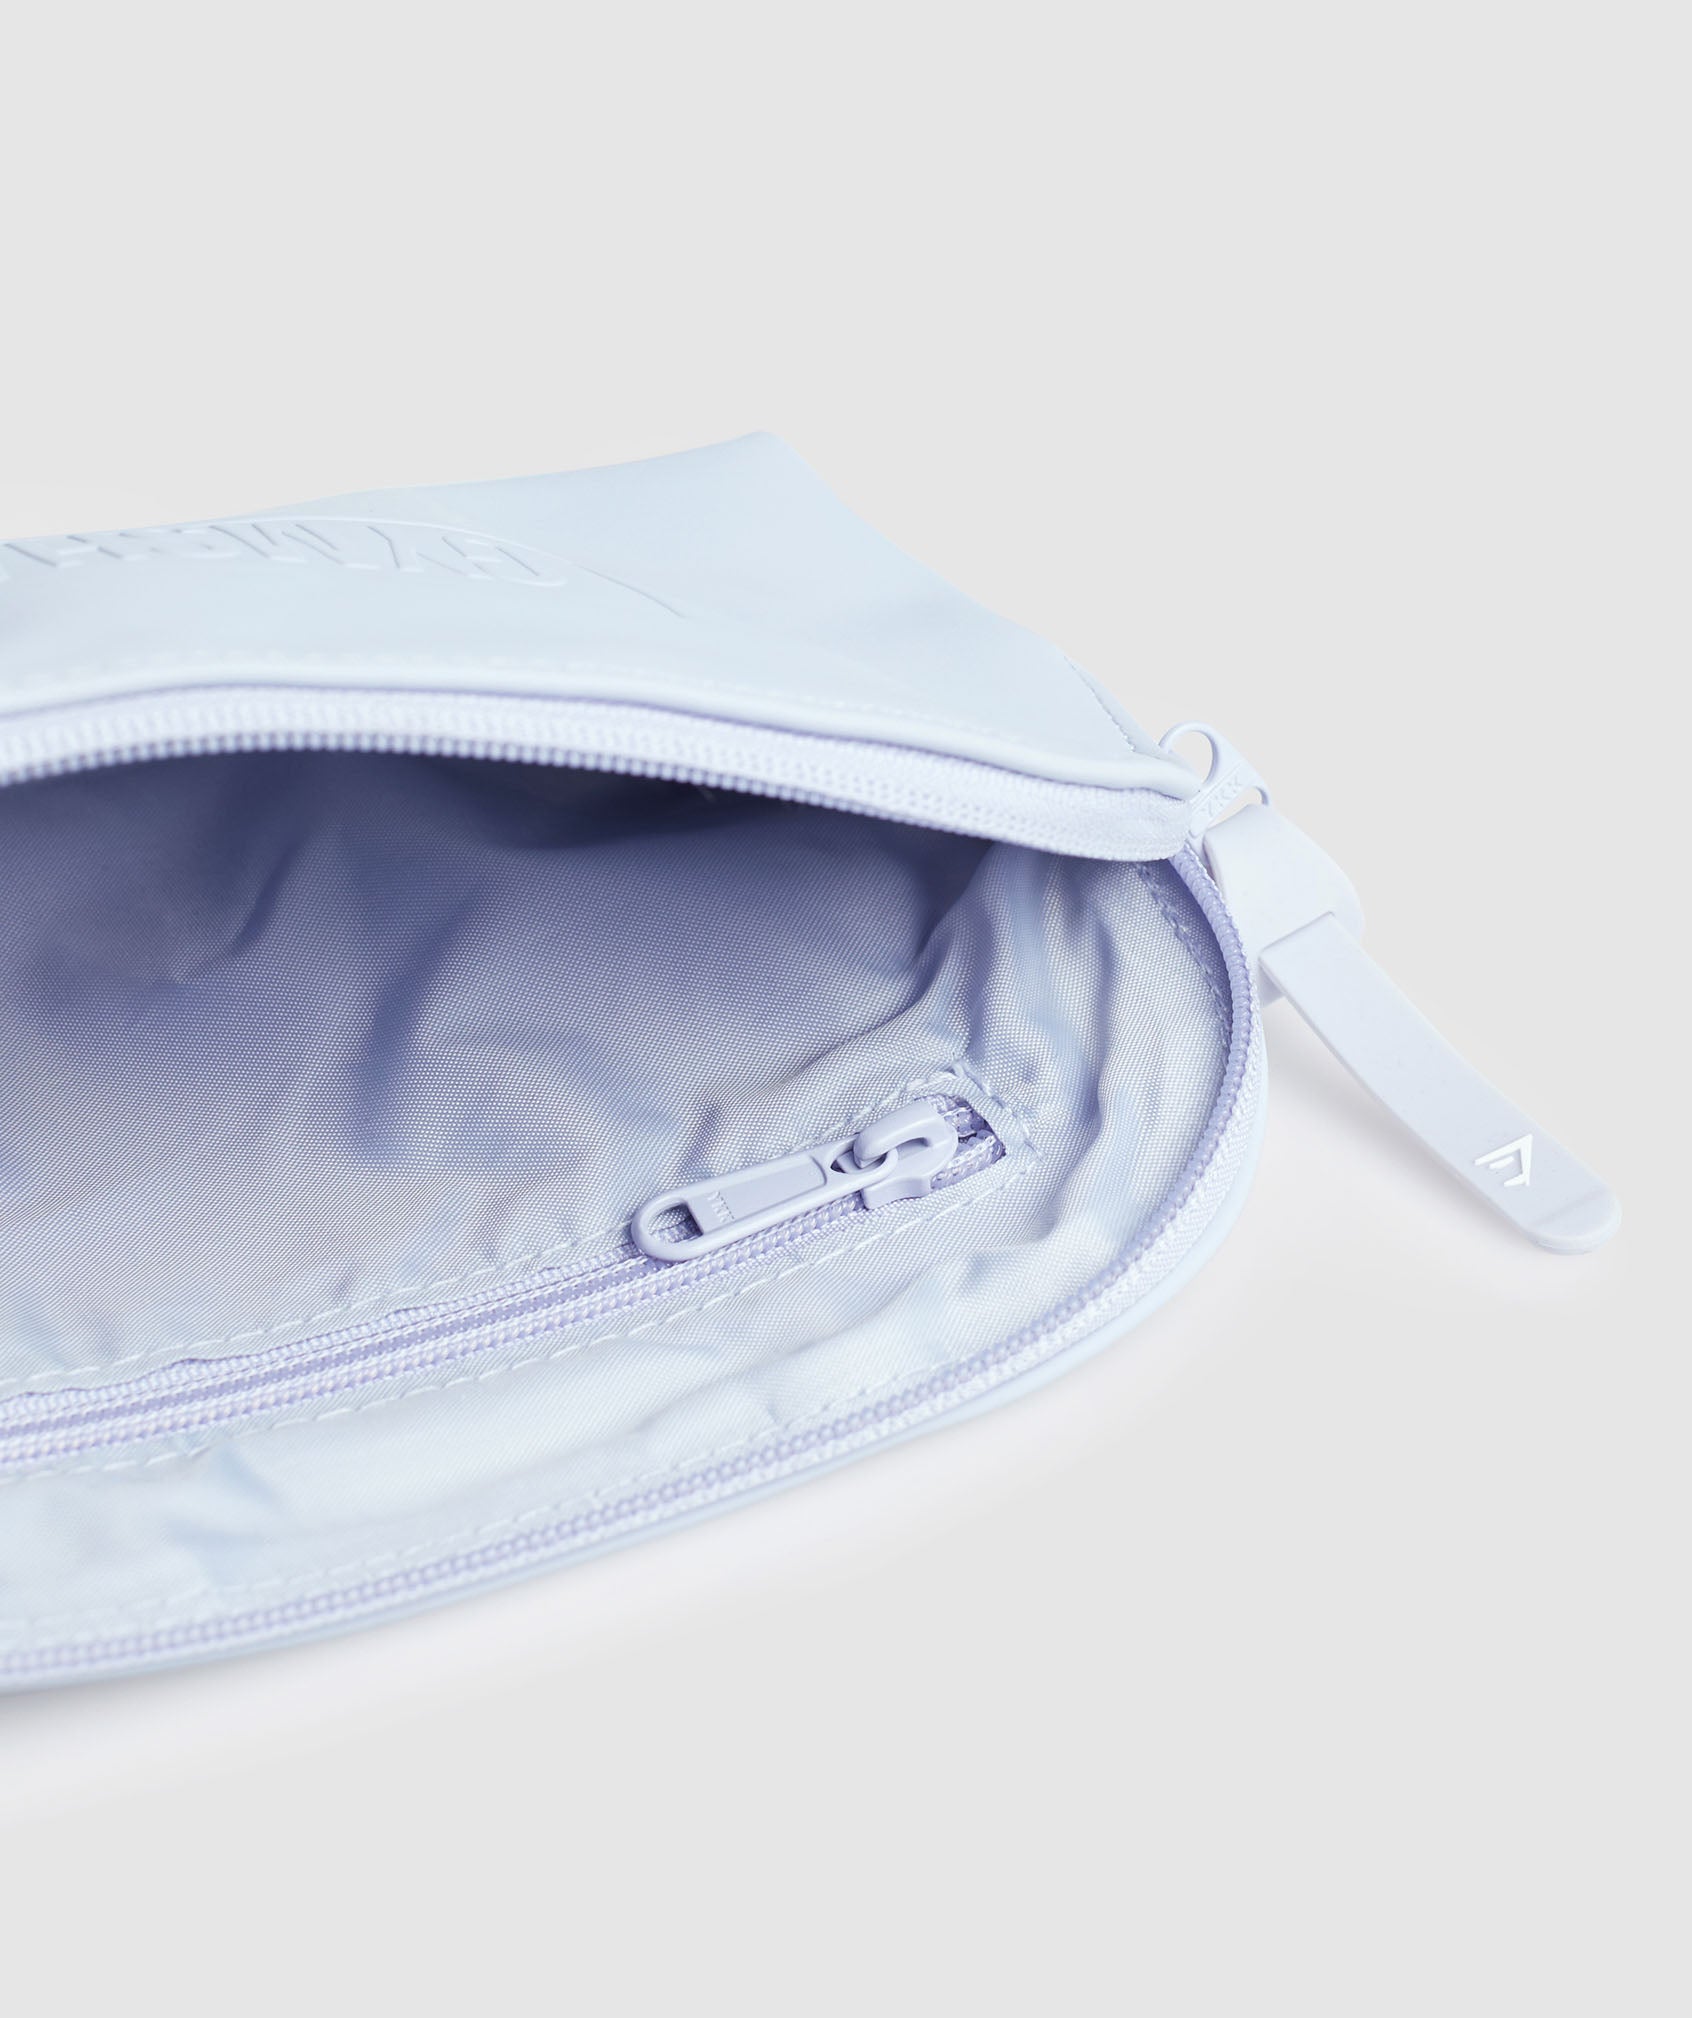 Everyday Wash Bag in Silver Lilac - view 3